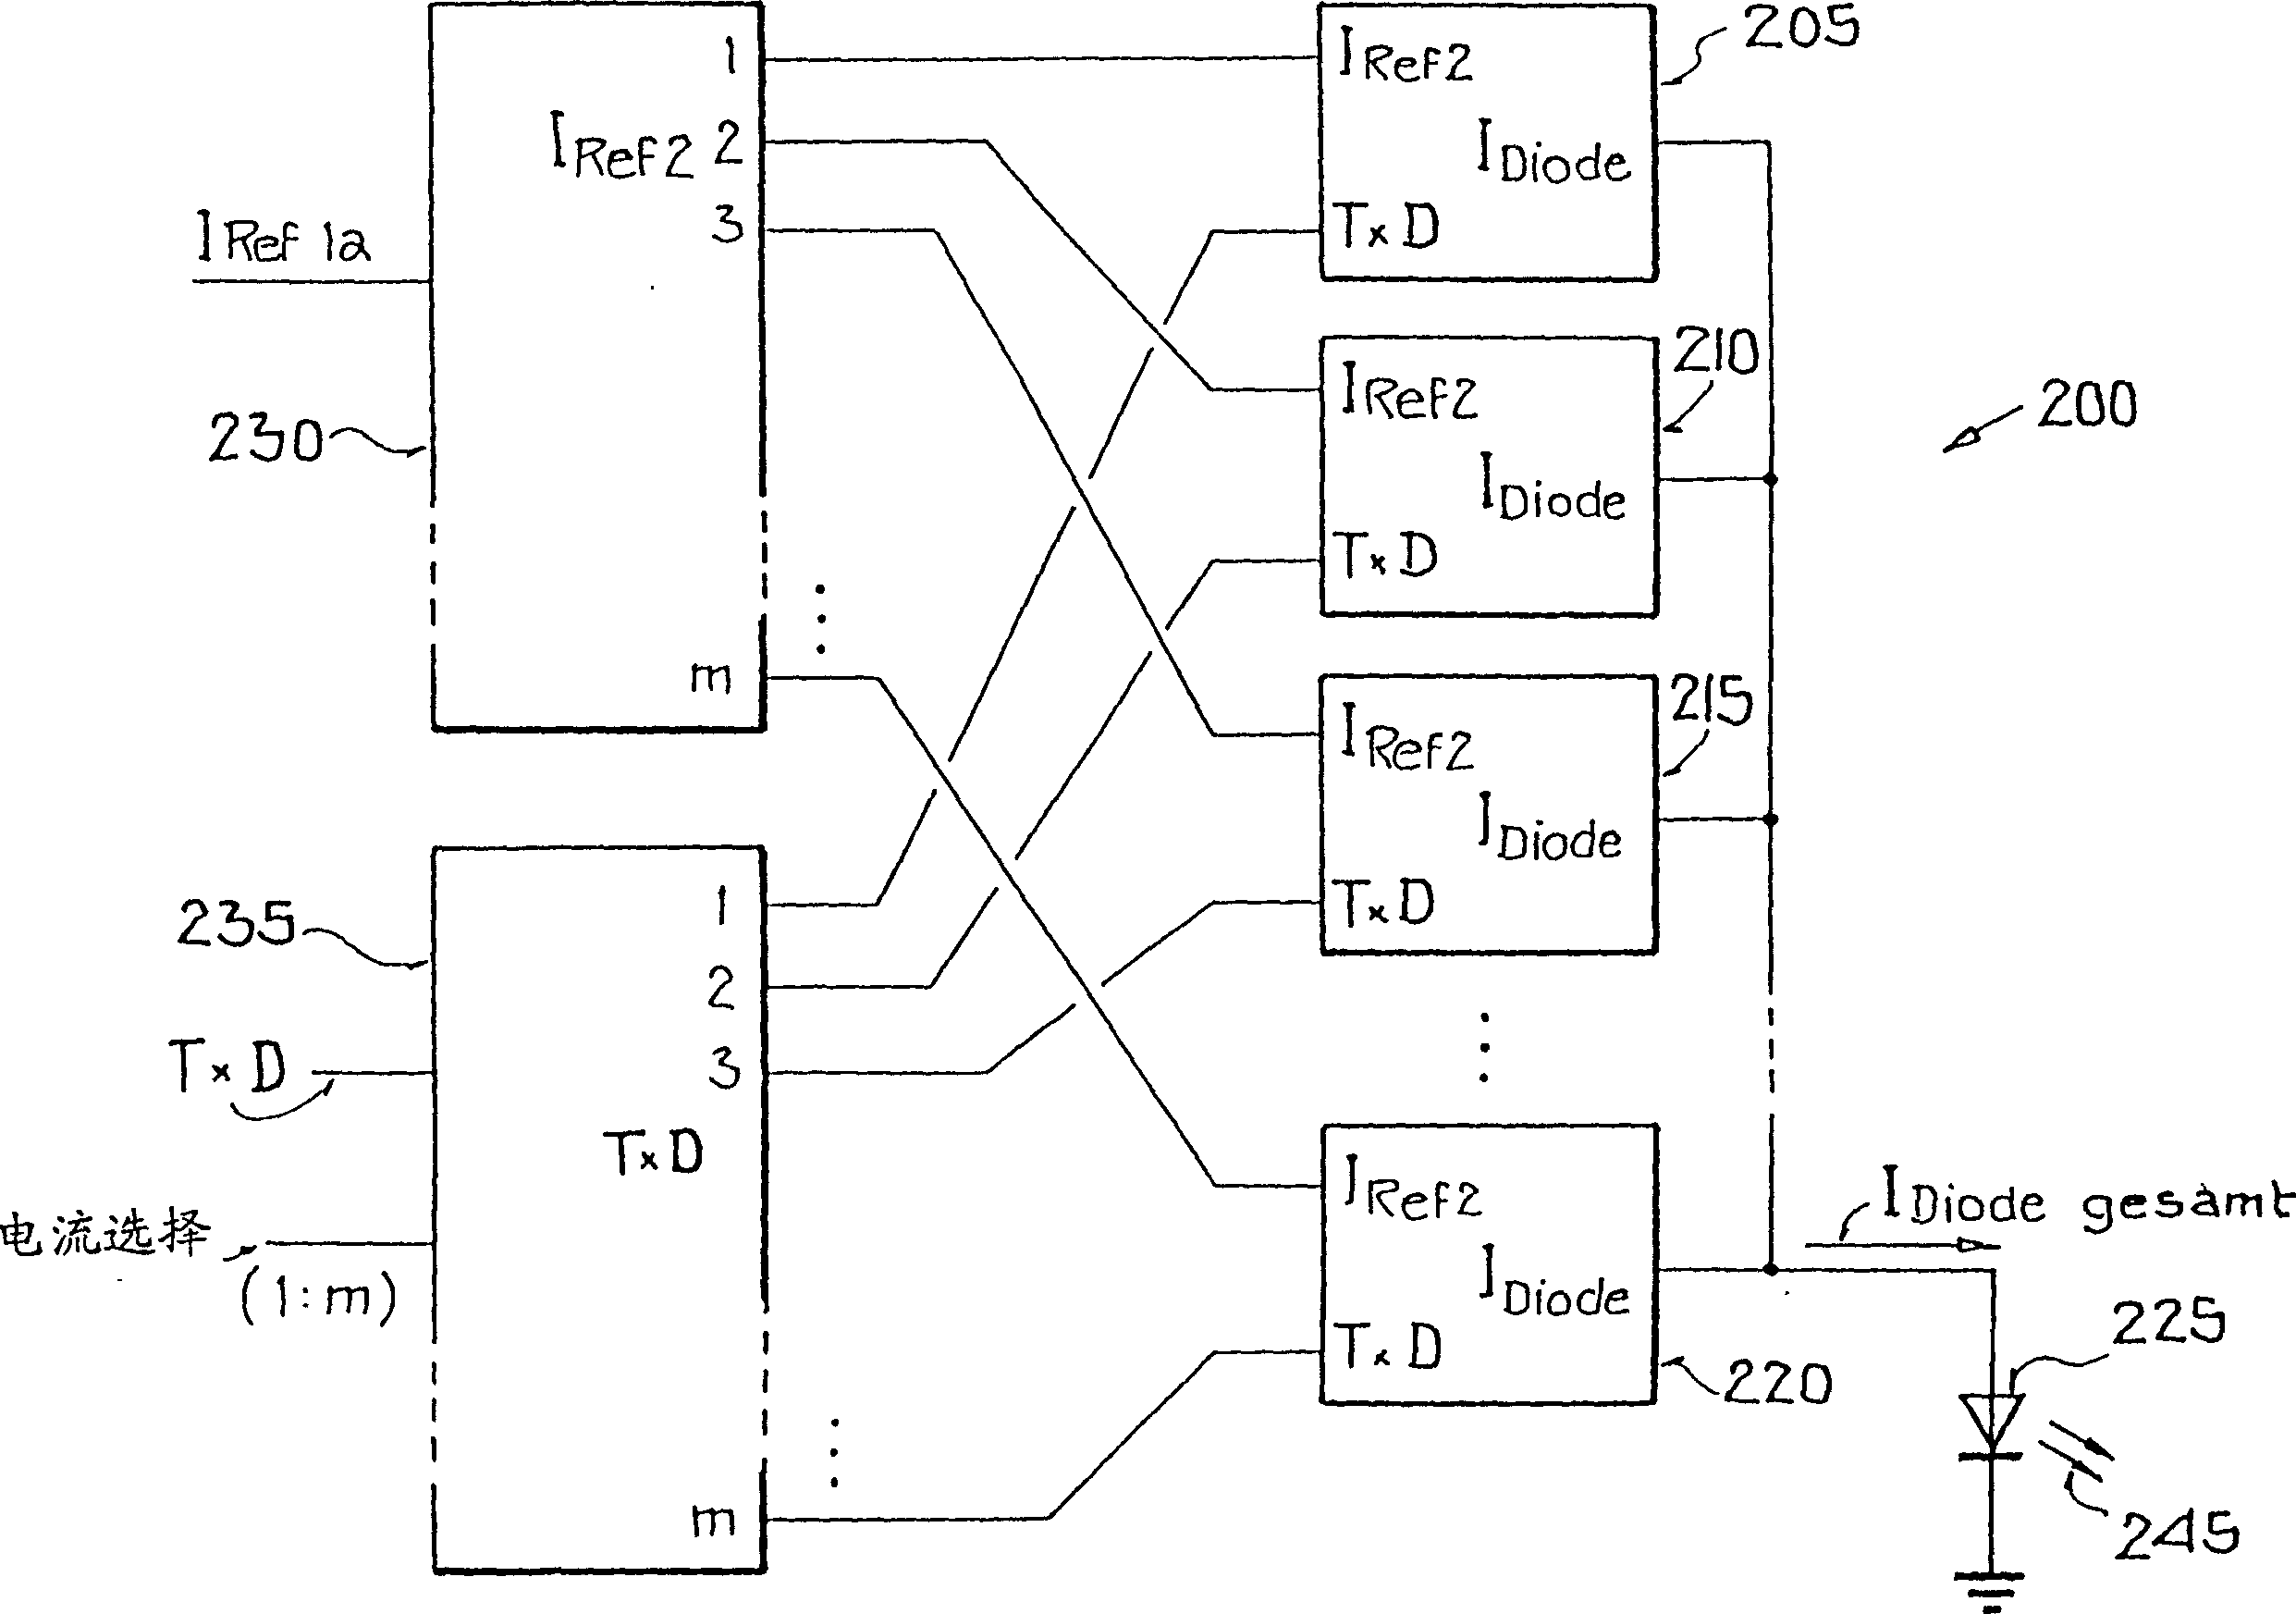 Circuit for adjusting the drive power of emitting diodes